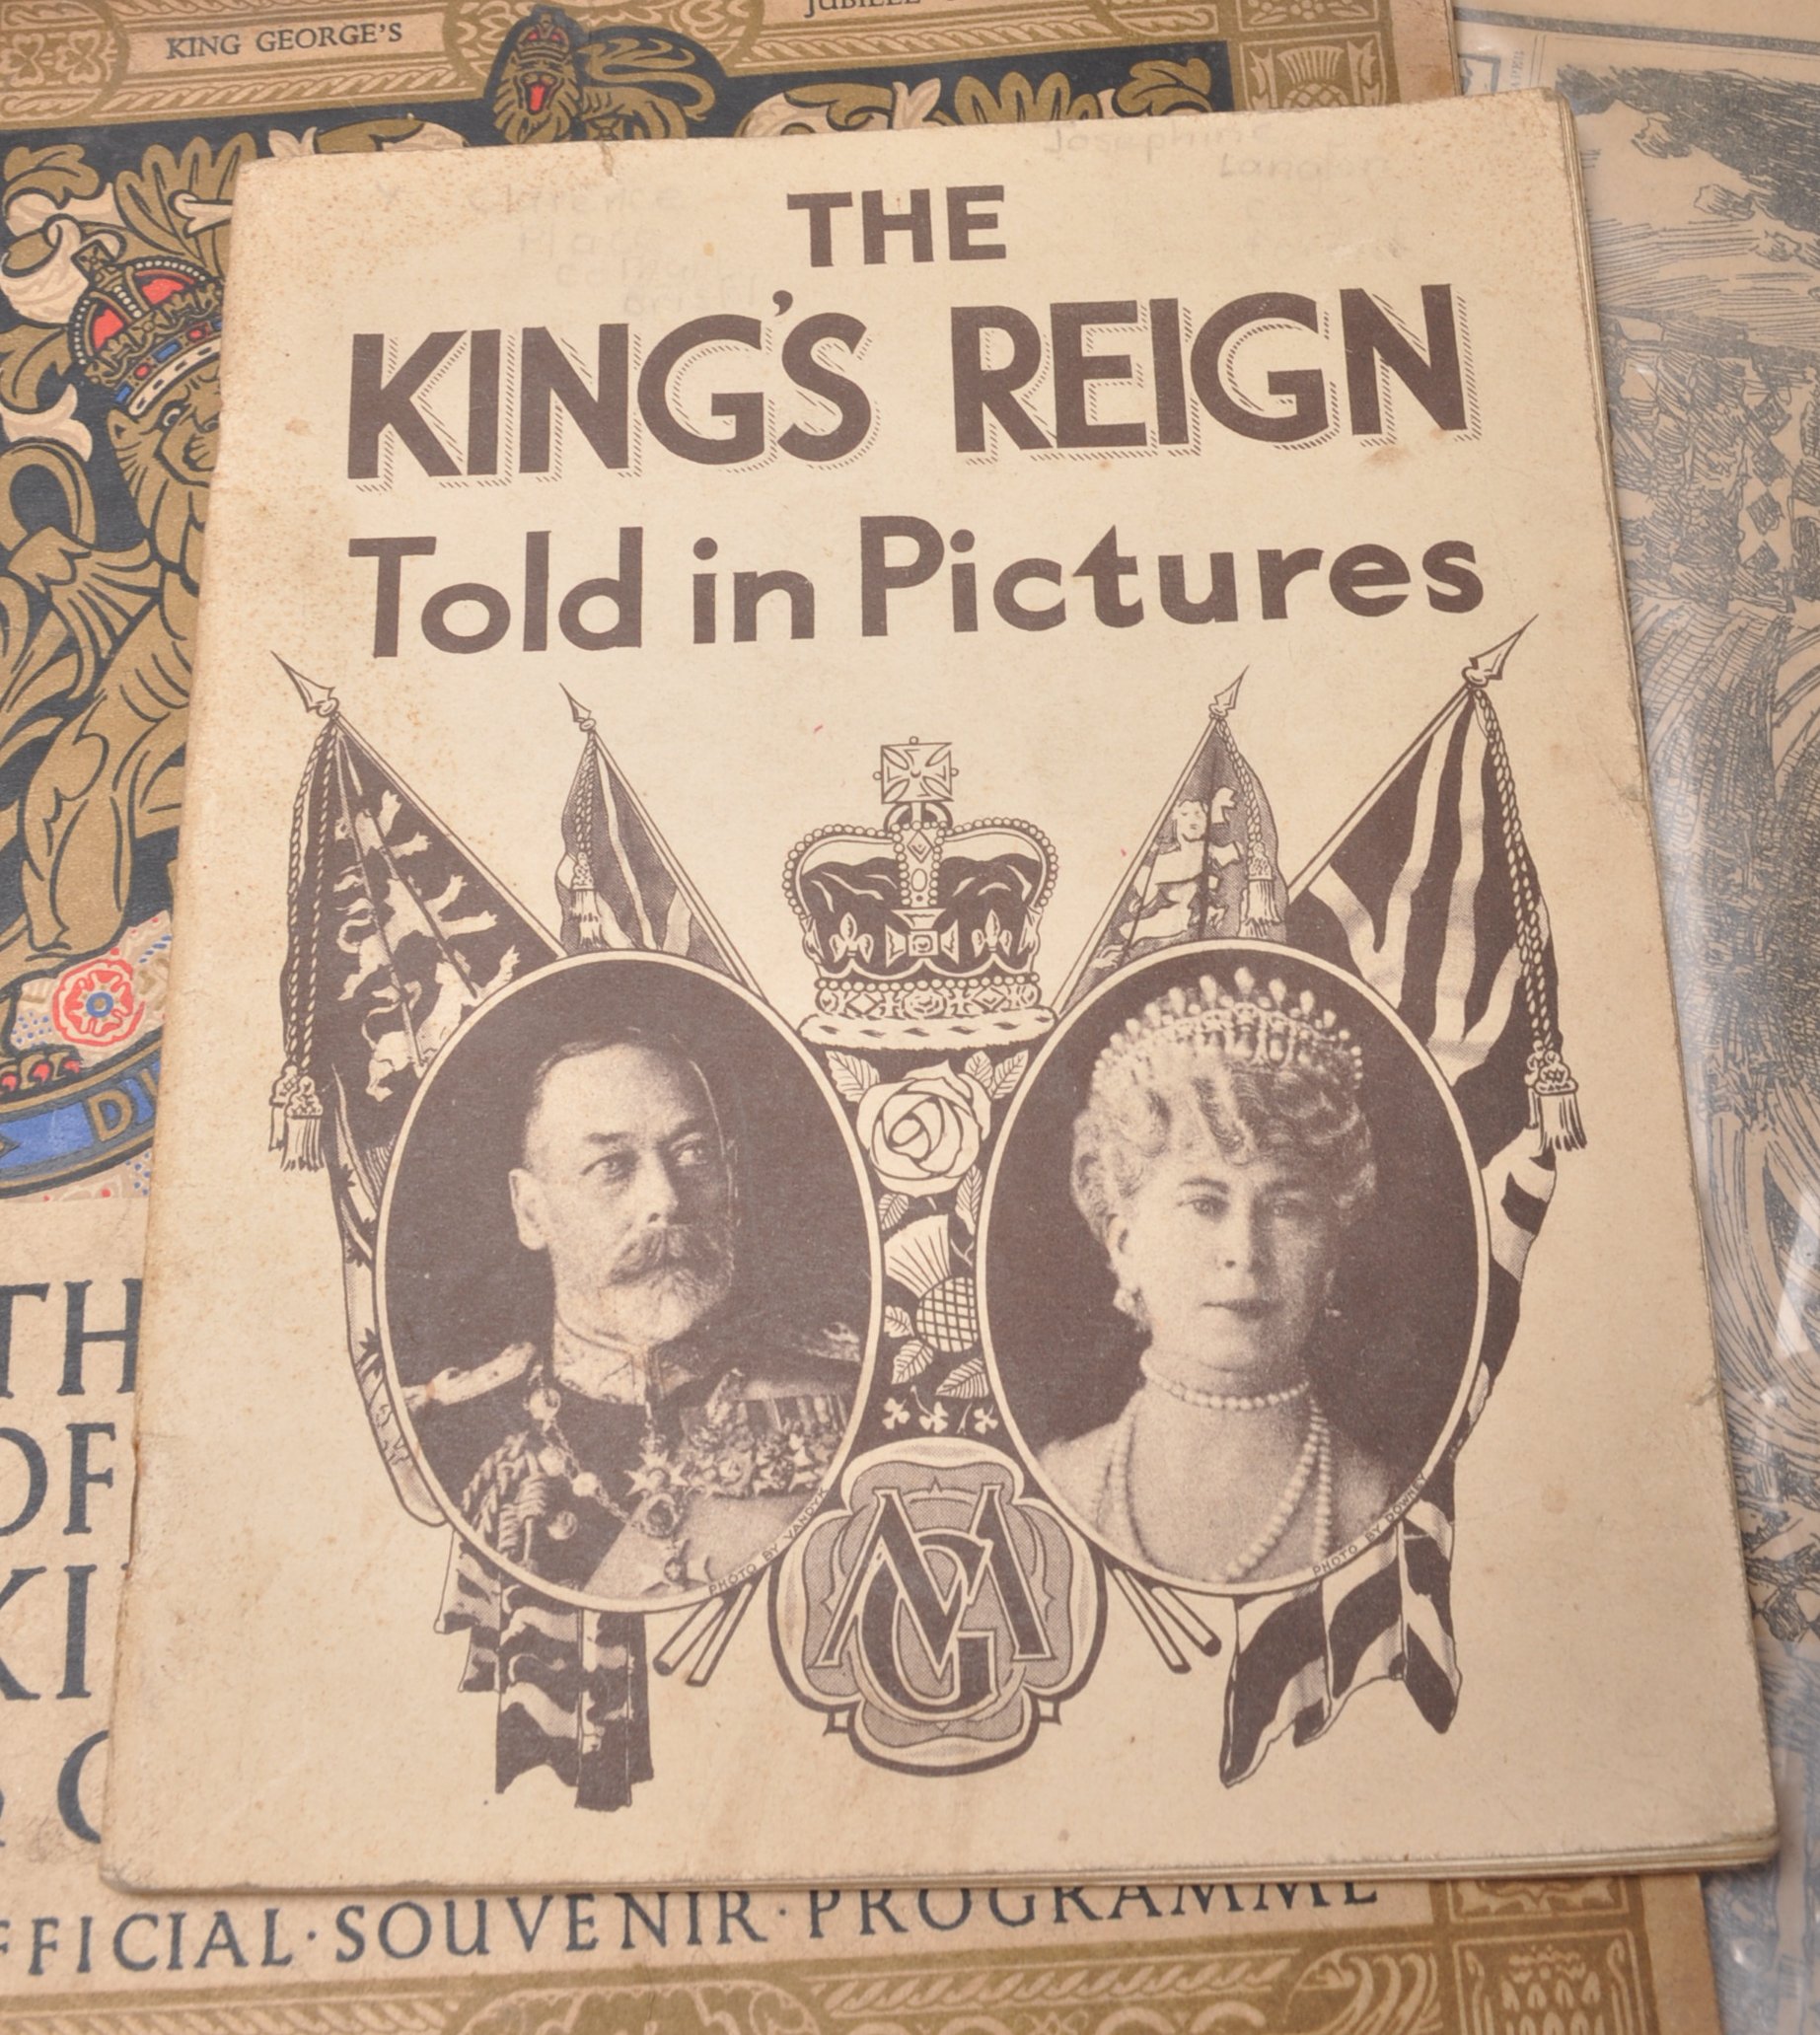 COLLECTION OF 20TH CENTURY ROYAL FAMILY EPHEMERAL - Image 9 of 14